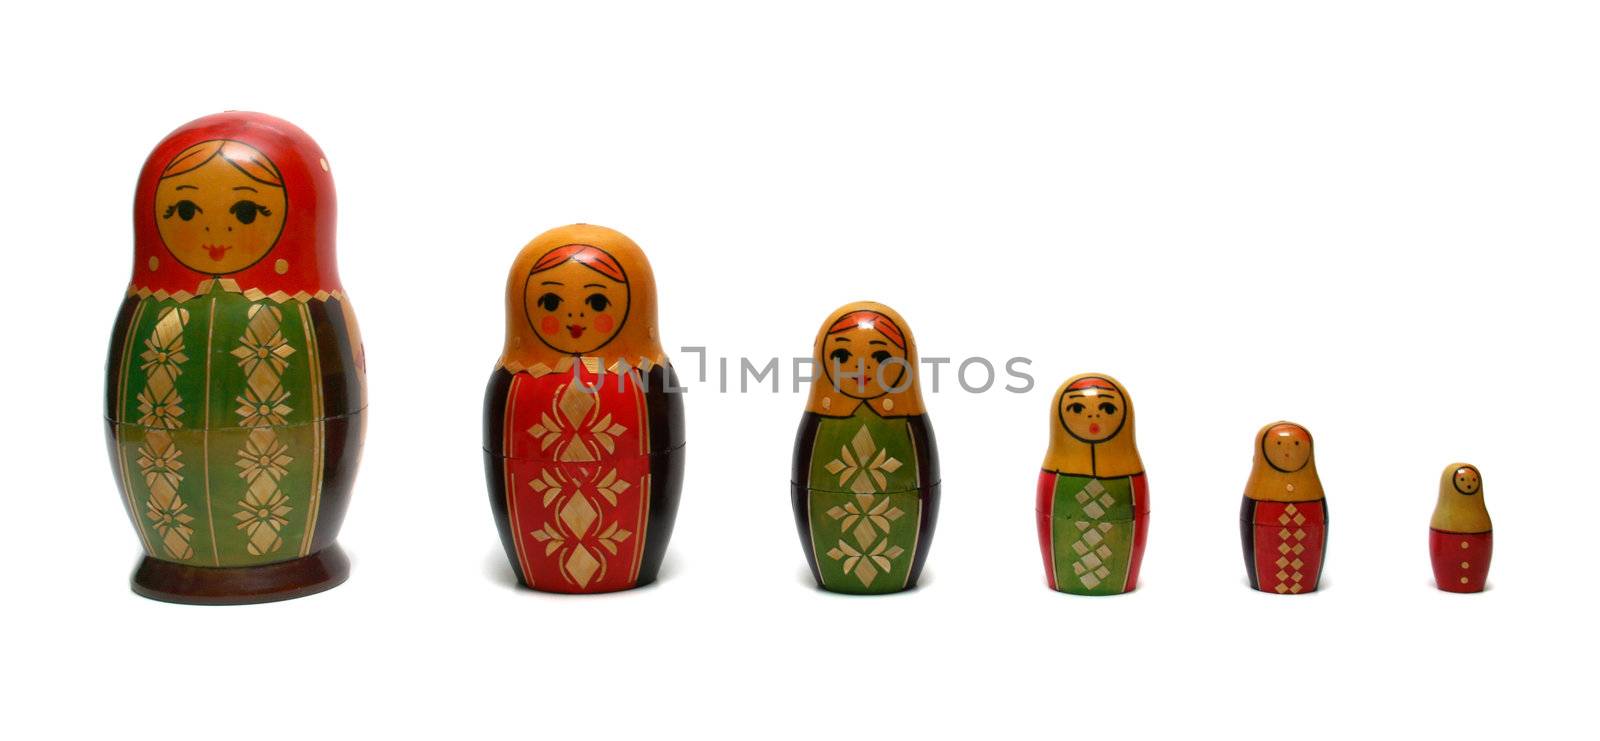 Traditional russian toys by Gdolgikh